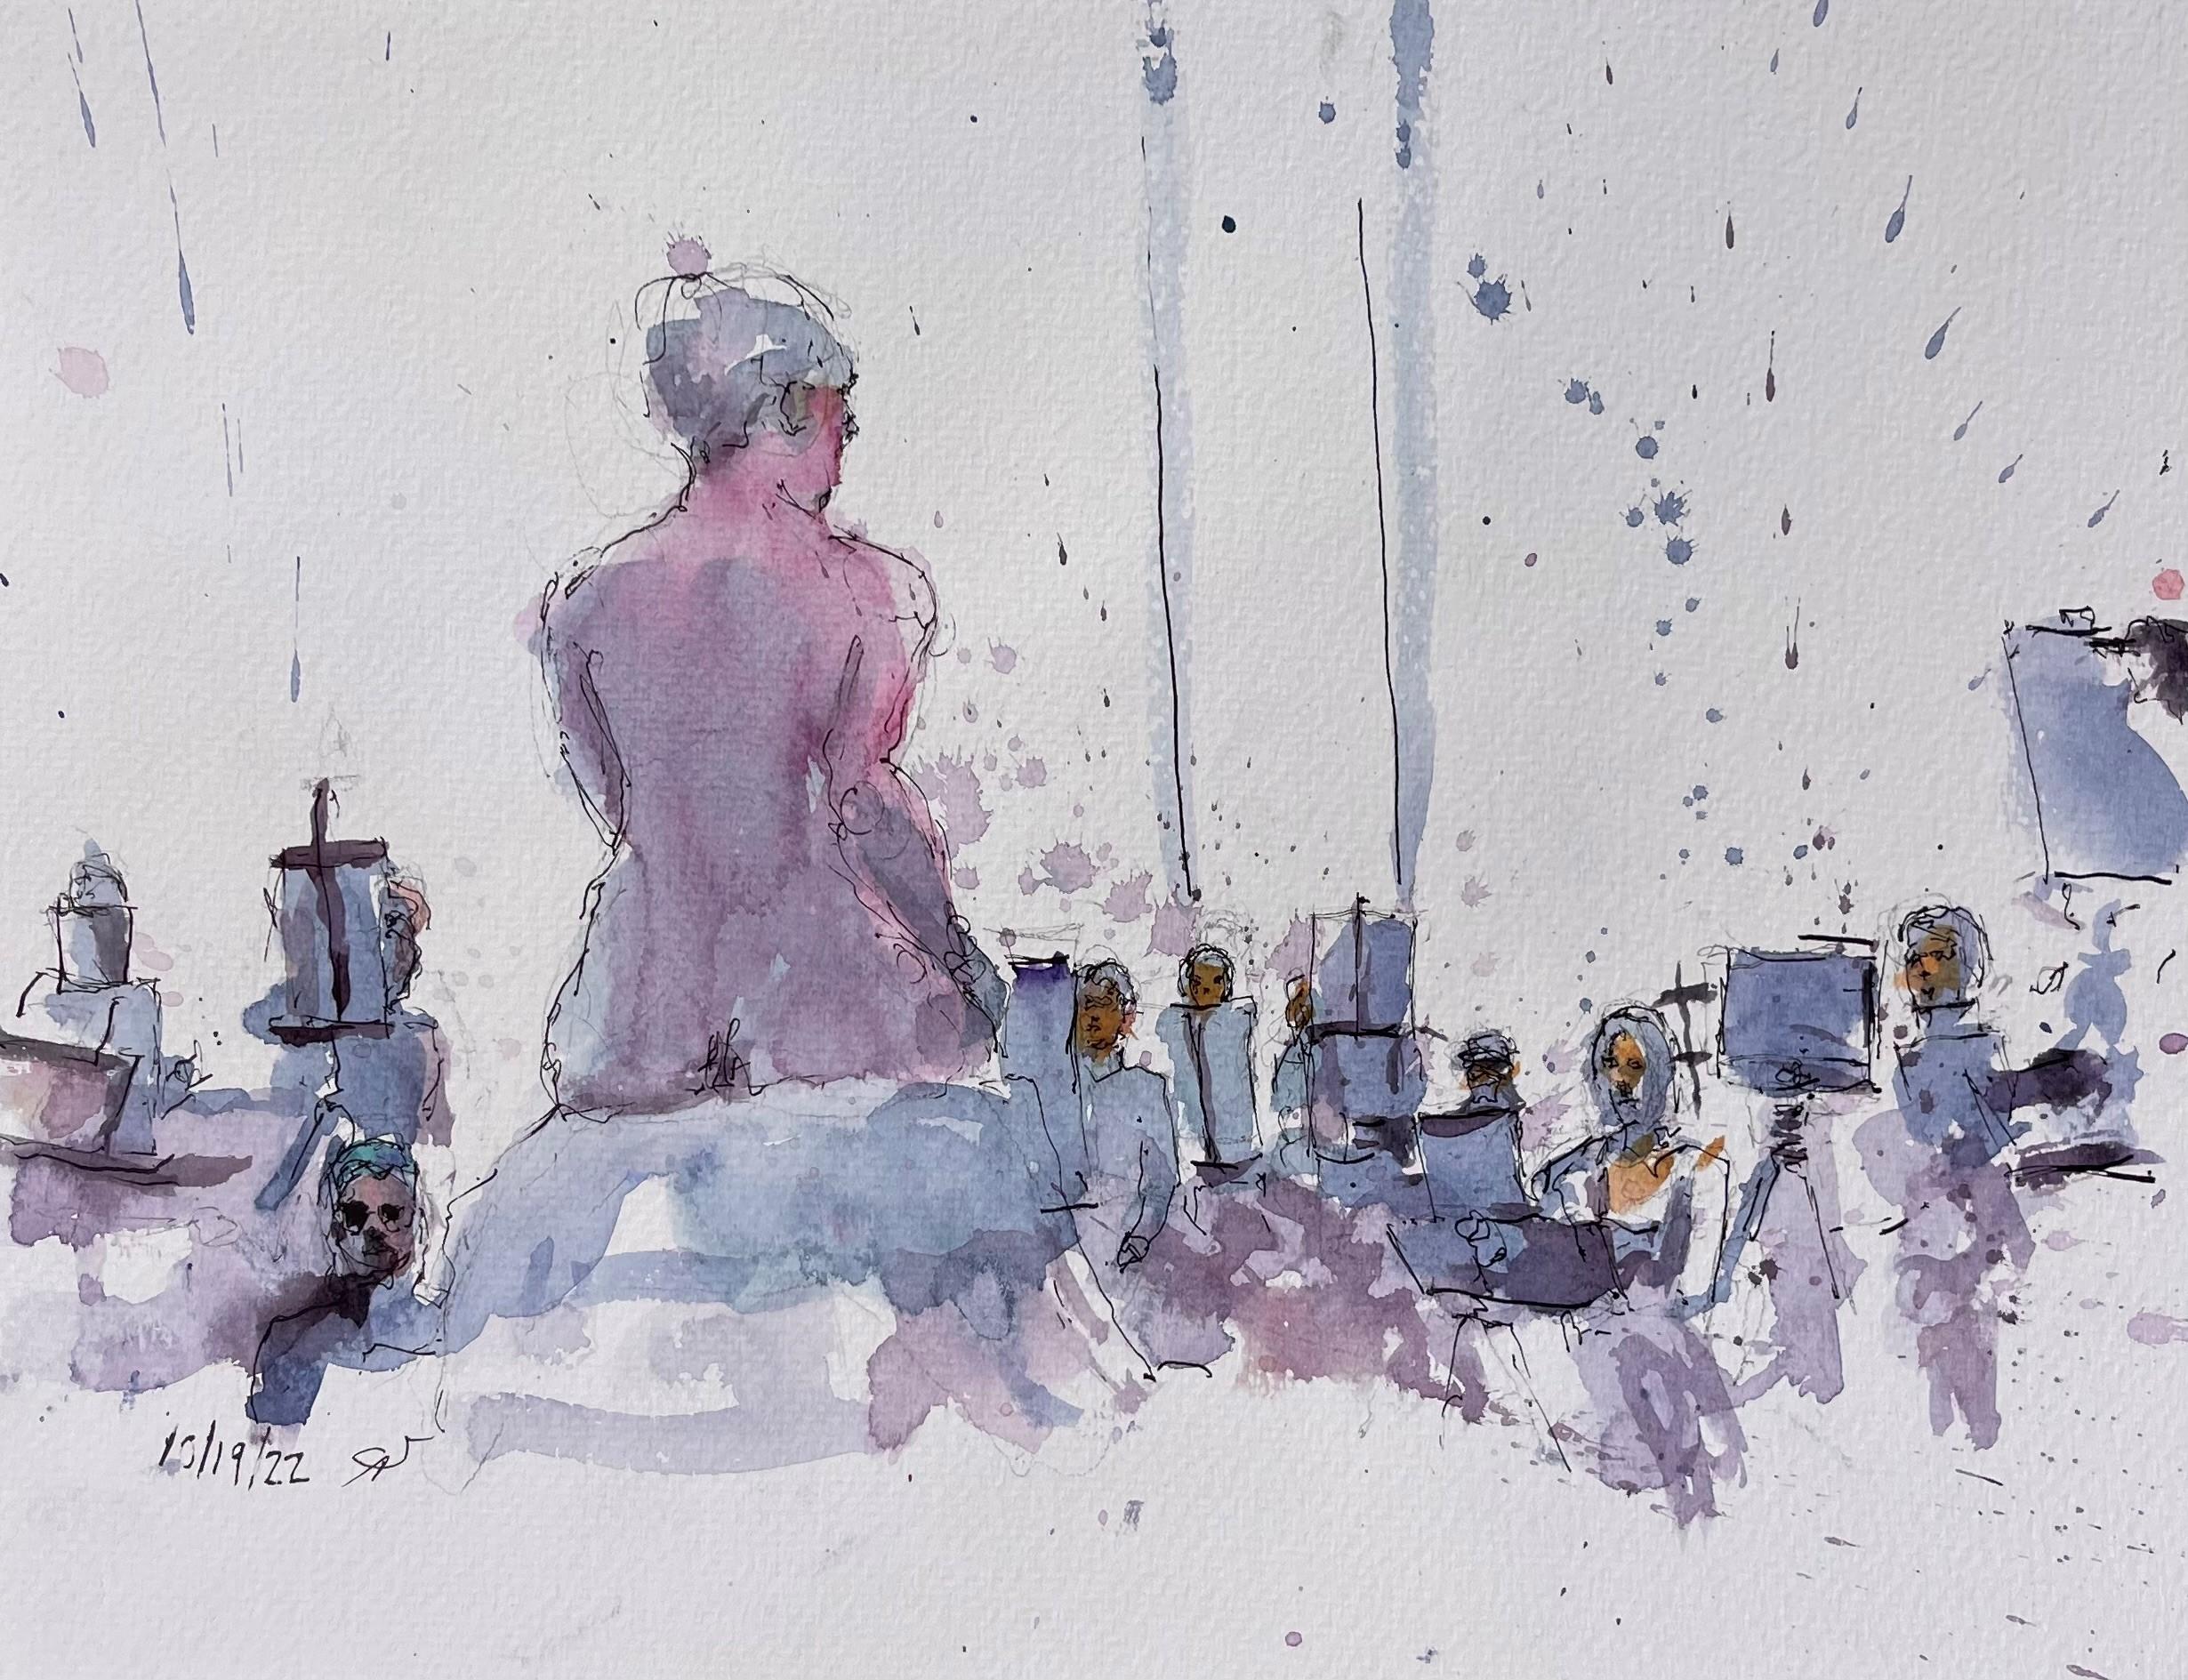 Clyde Steadman Portrait - "Untitled 20, " Watercolor Painting